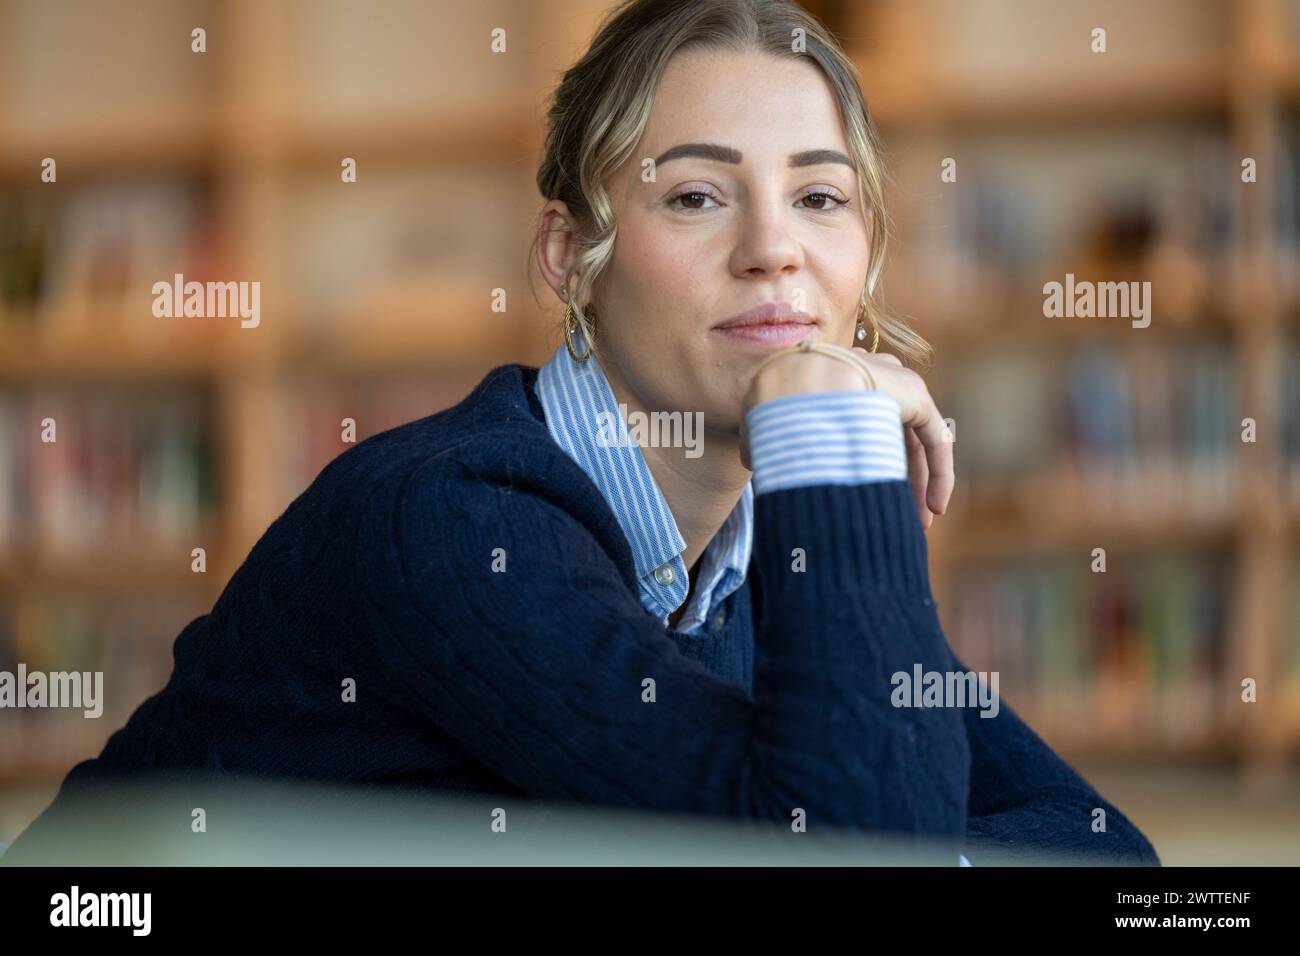 A contemplative woman resting her chin on her hand in a library Stock Photo